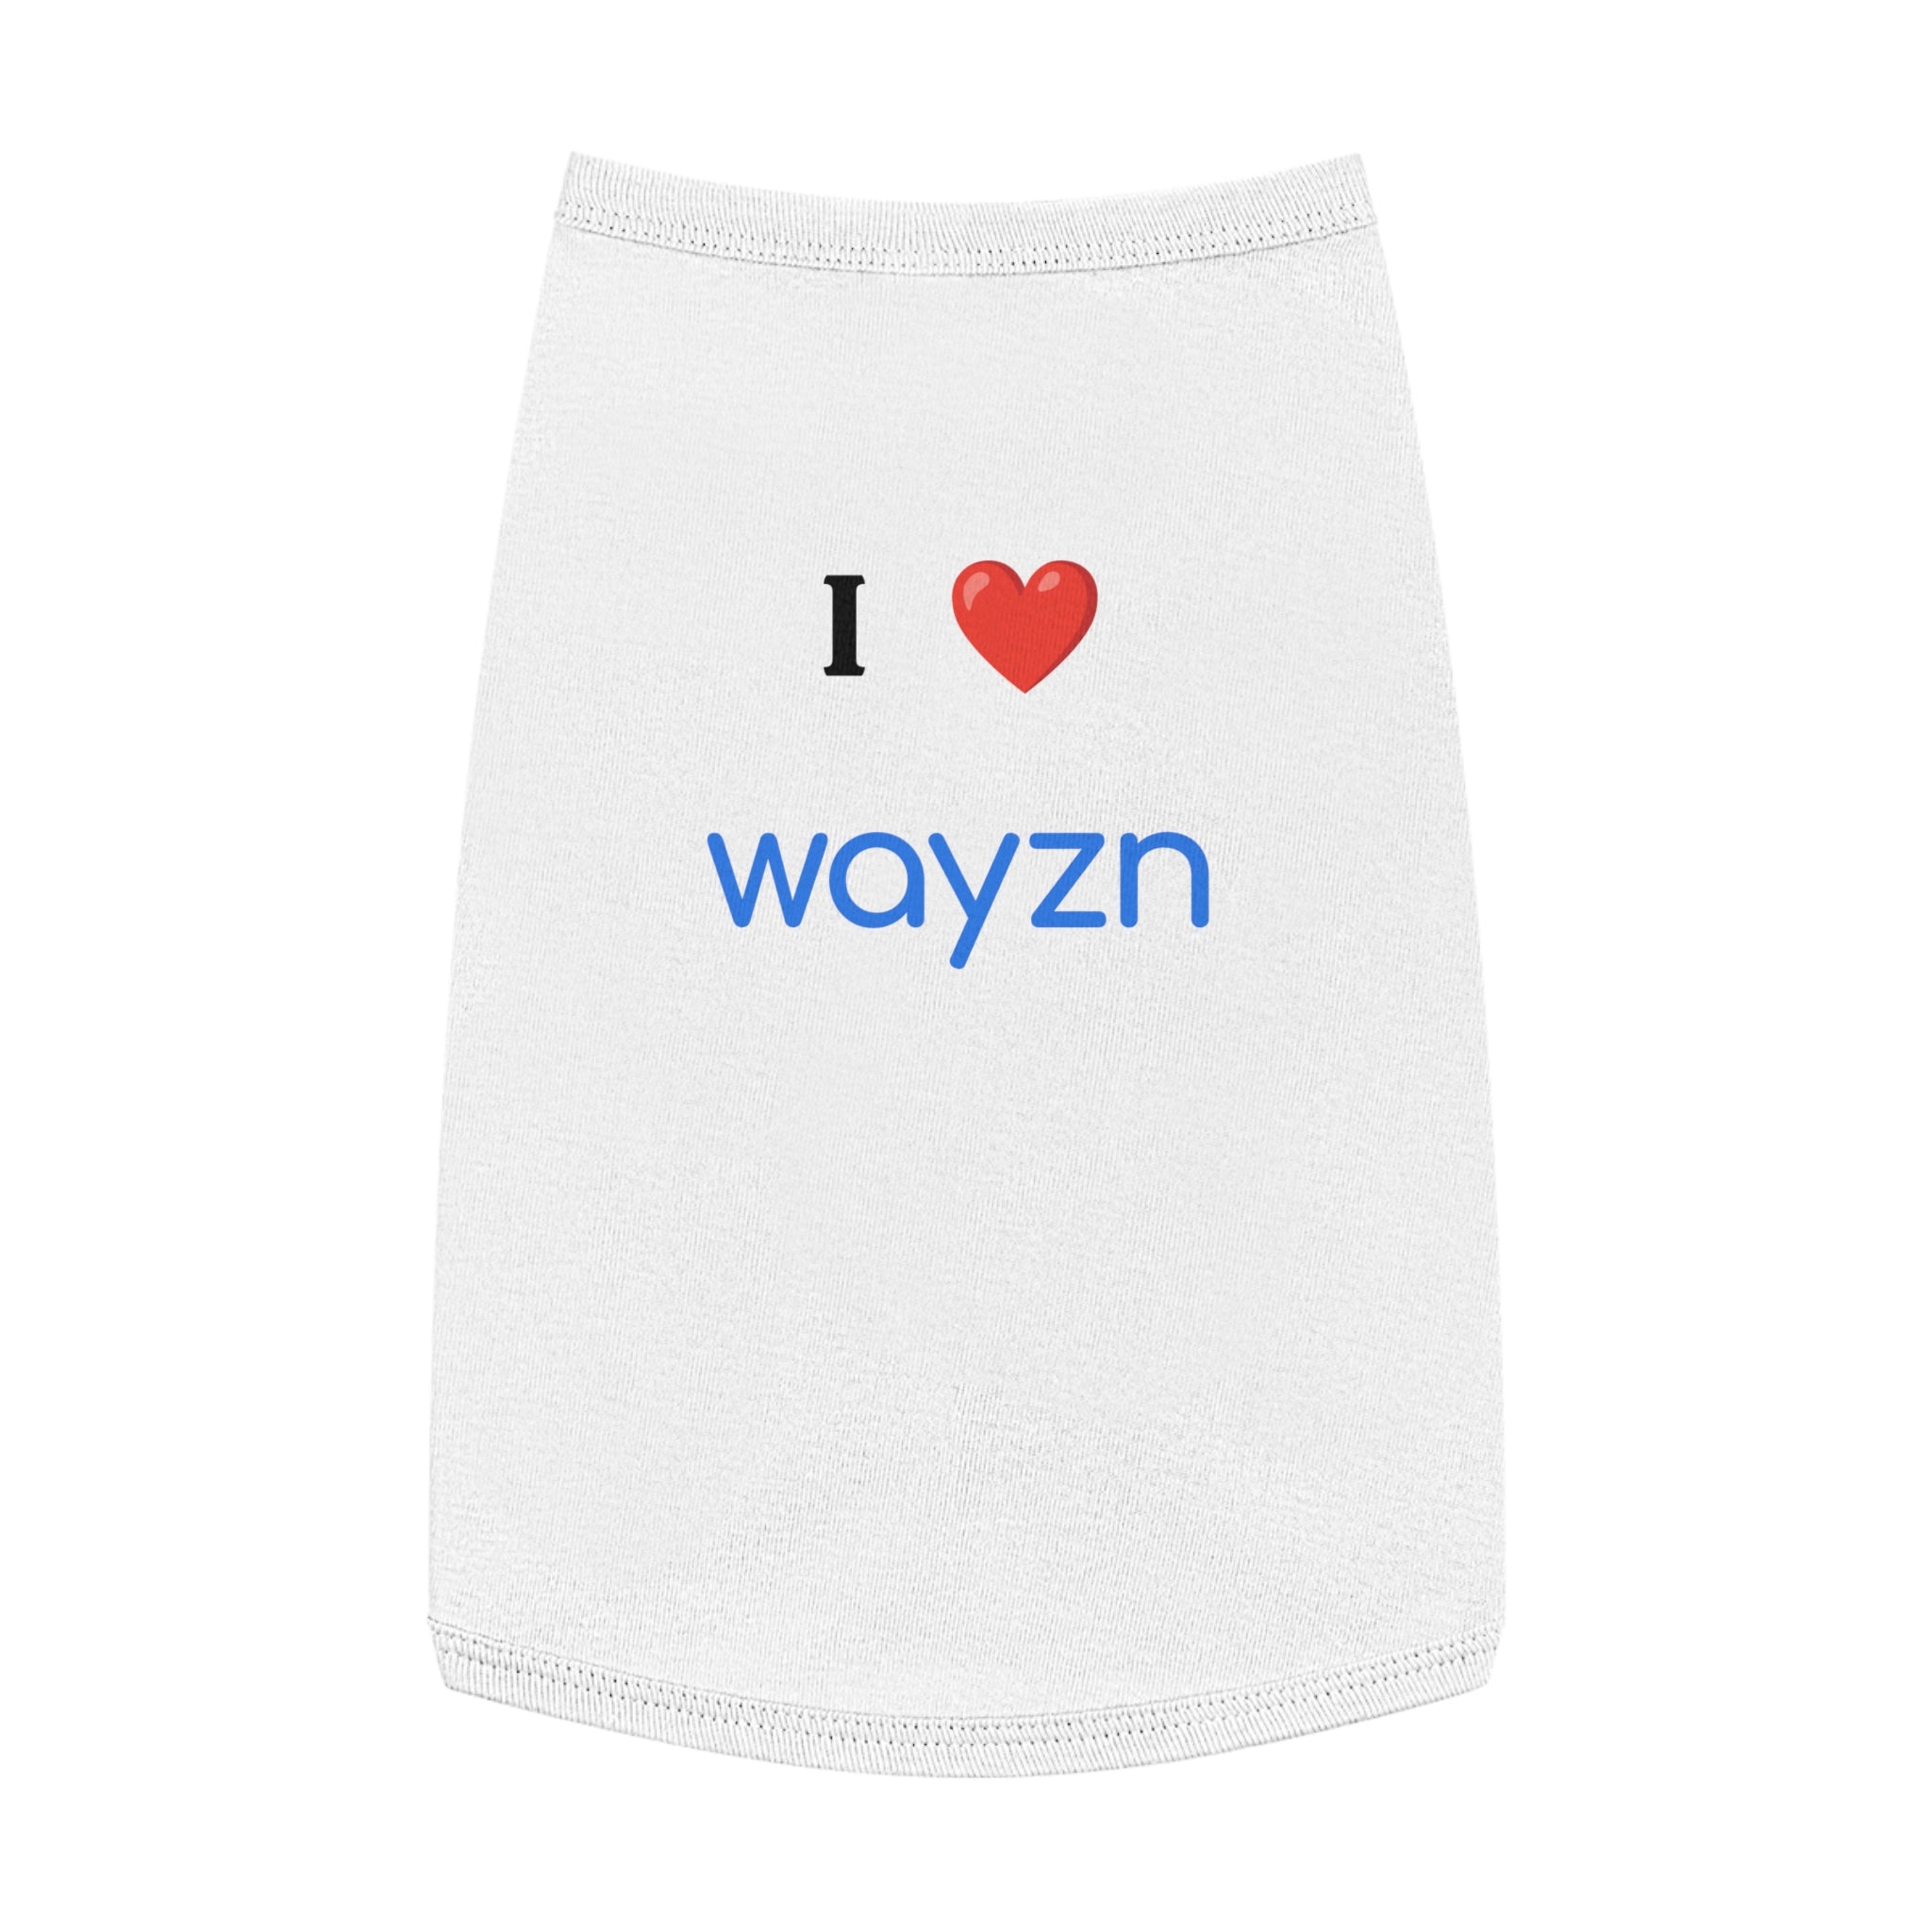 I Heart Wayzn - Dog Jersey: A white dog jersey with a red heart and blue text.